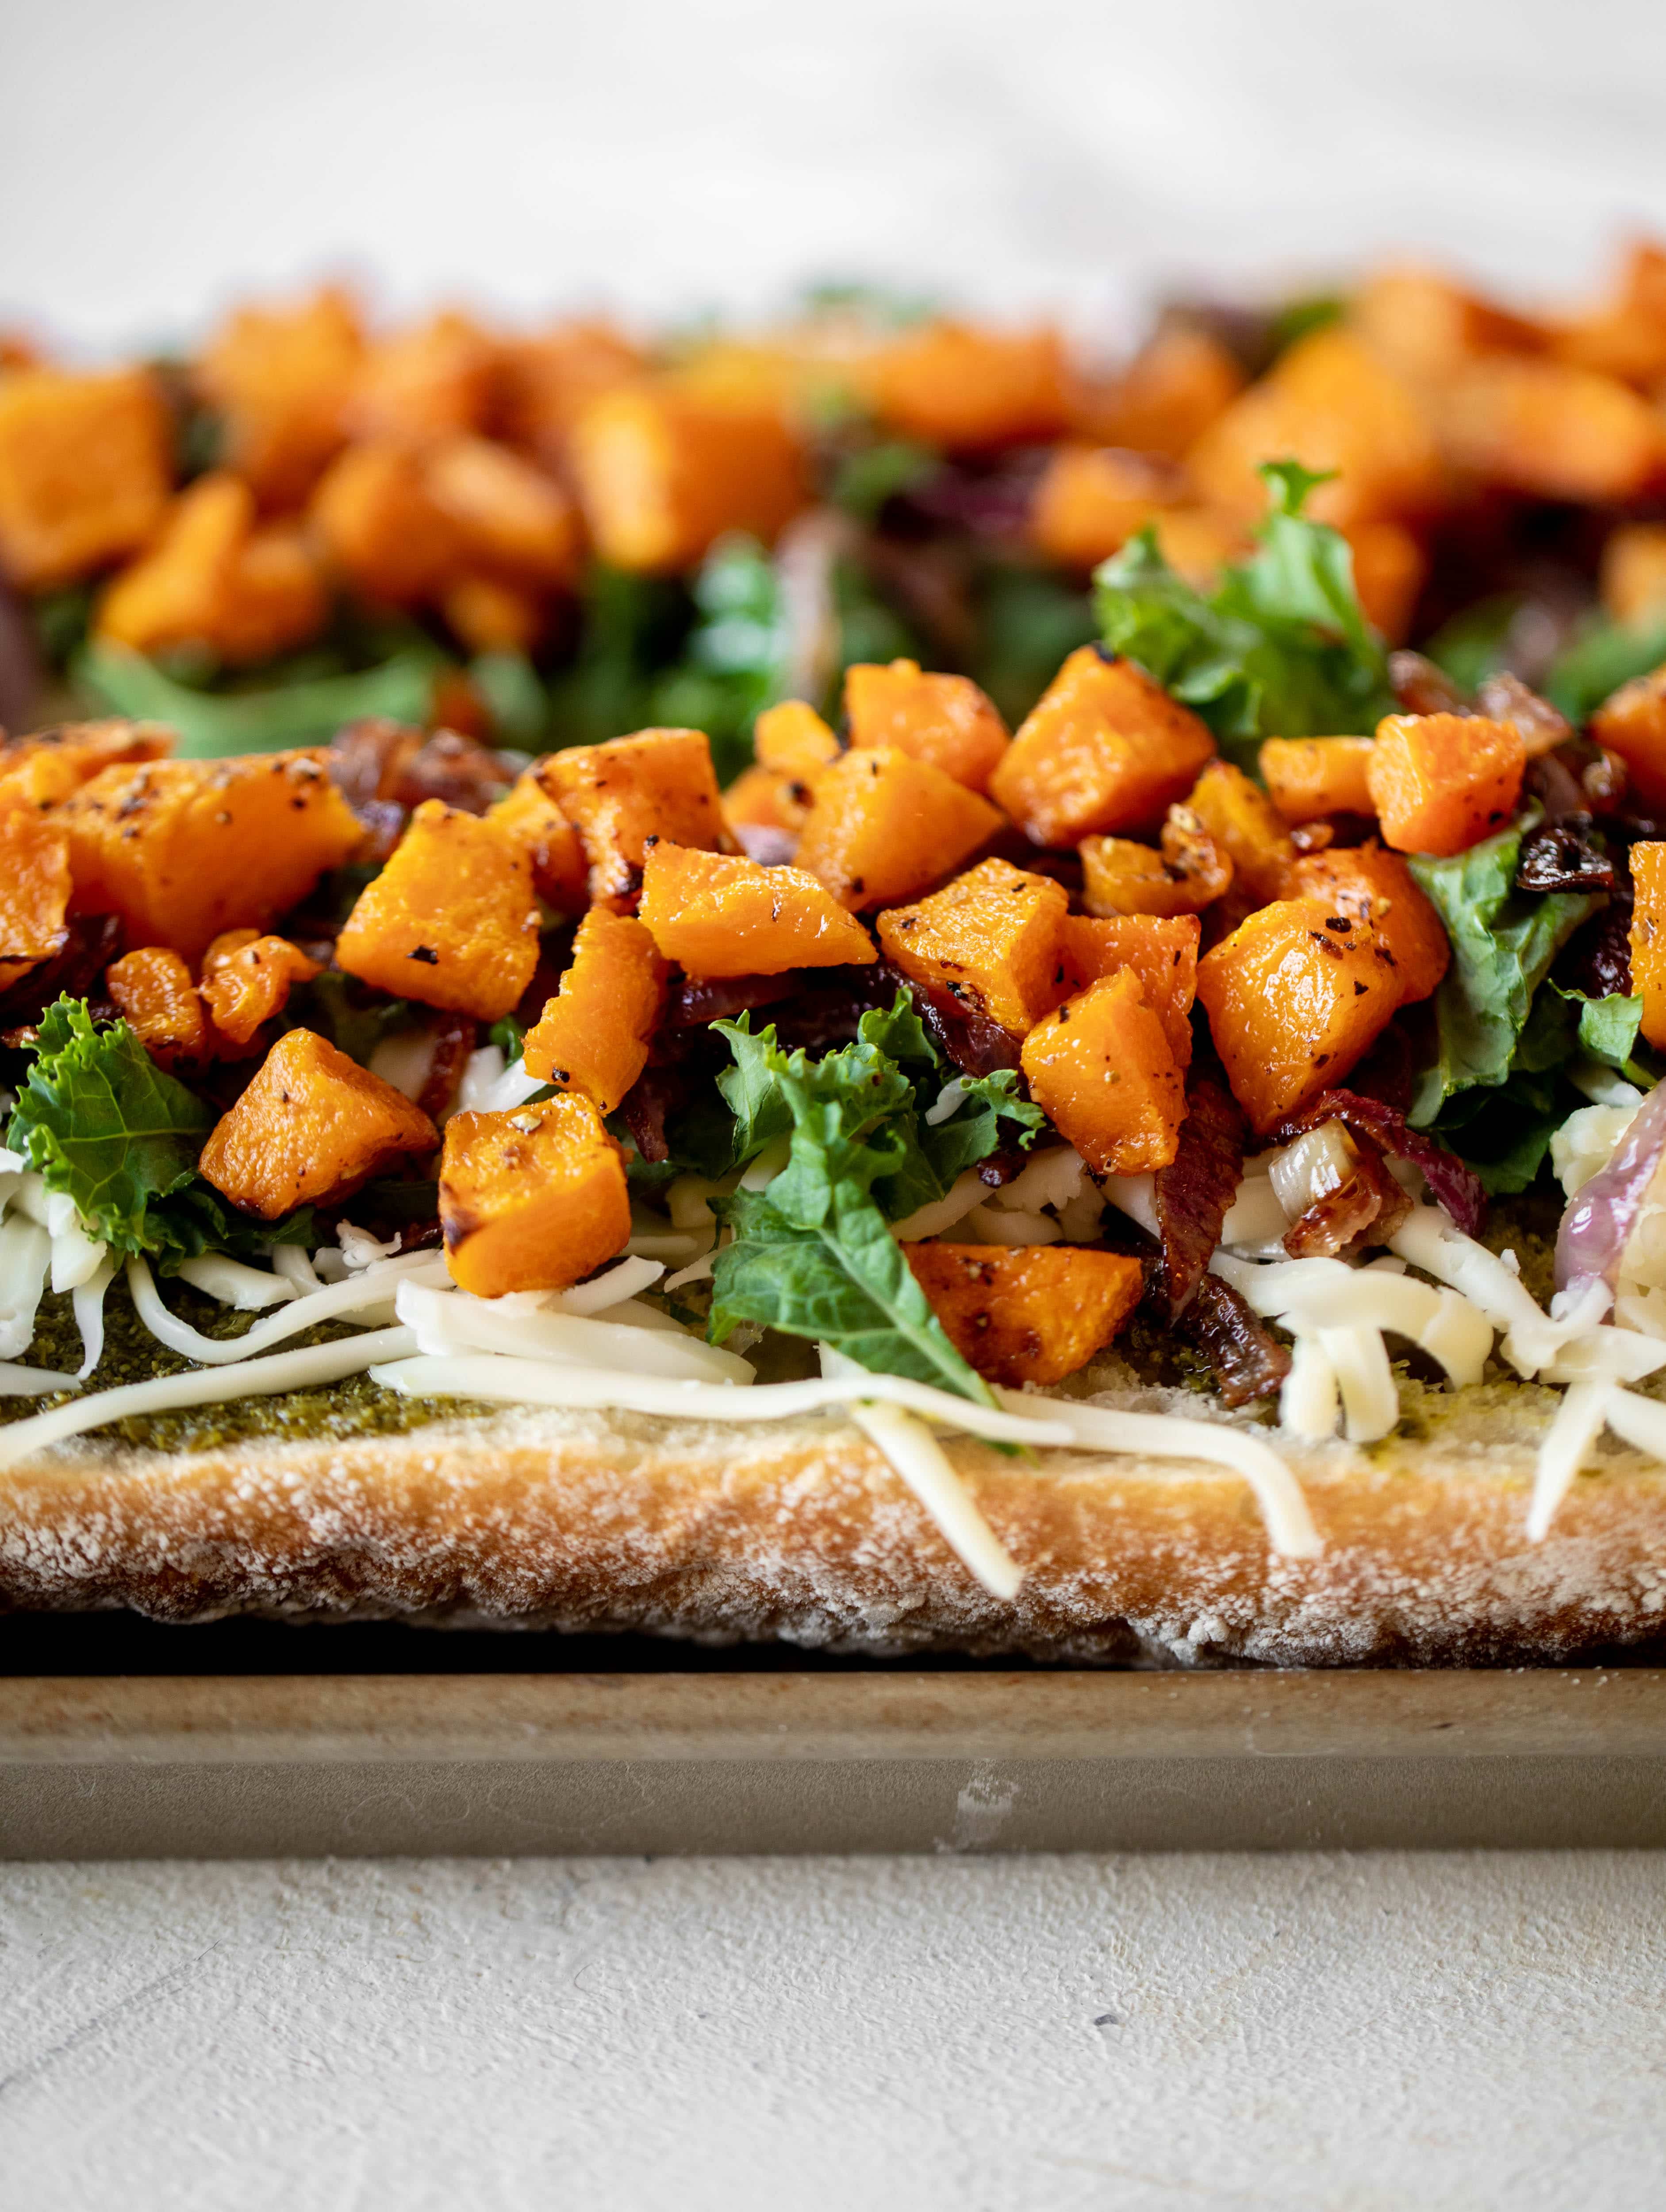 These butternut squash french breads have so much flavor. Pesto, caramelized onions, kale, roasted butternut and tons of fontina cheese. Delicious! 